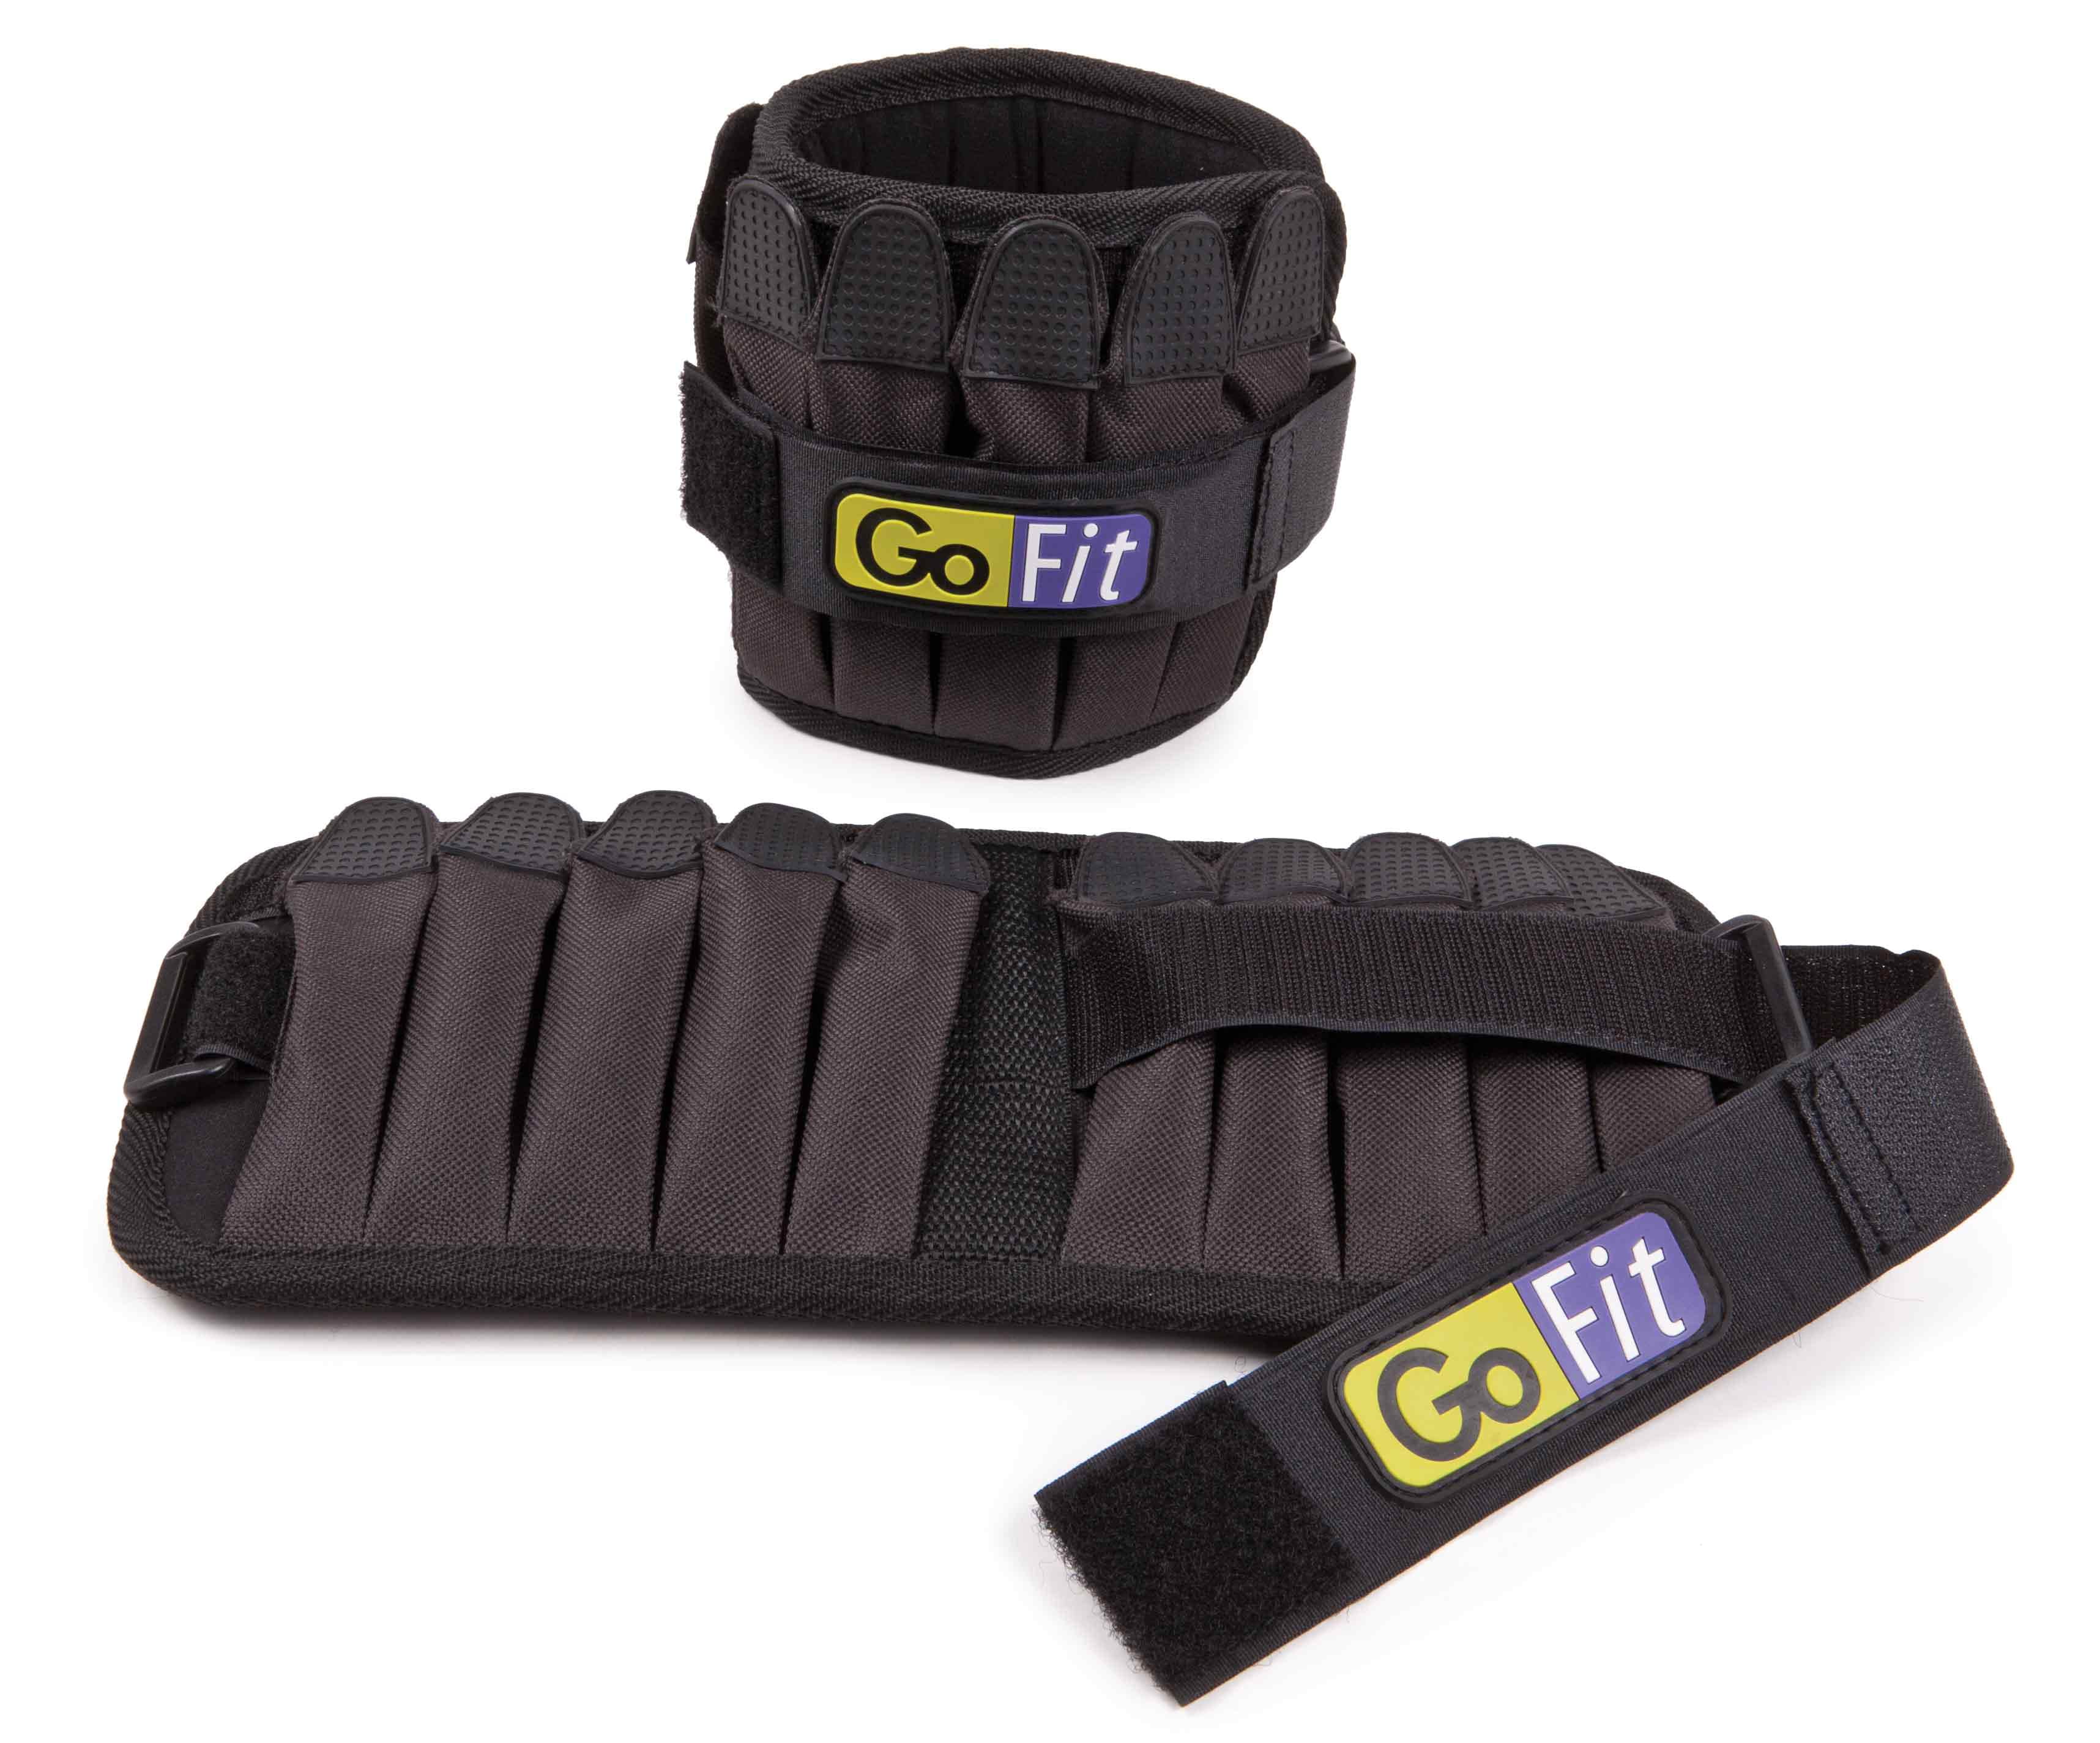 Fitness Gear 5 lb ankle weight set 2.5 lbs Each Comfort Fit Set of 2 